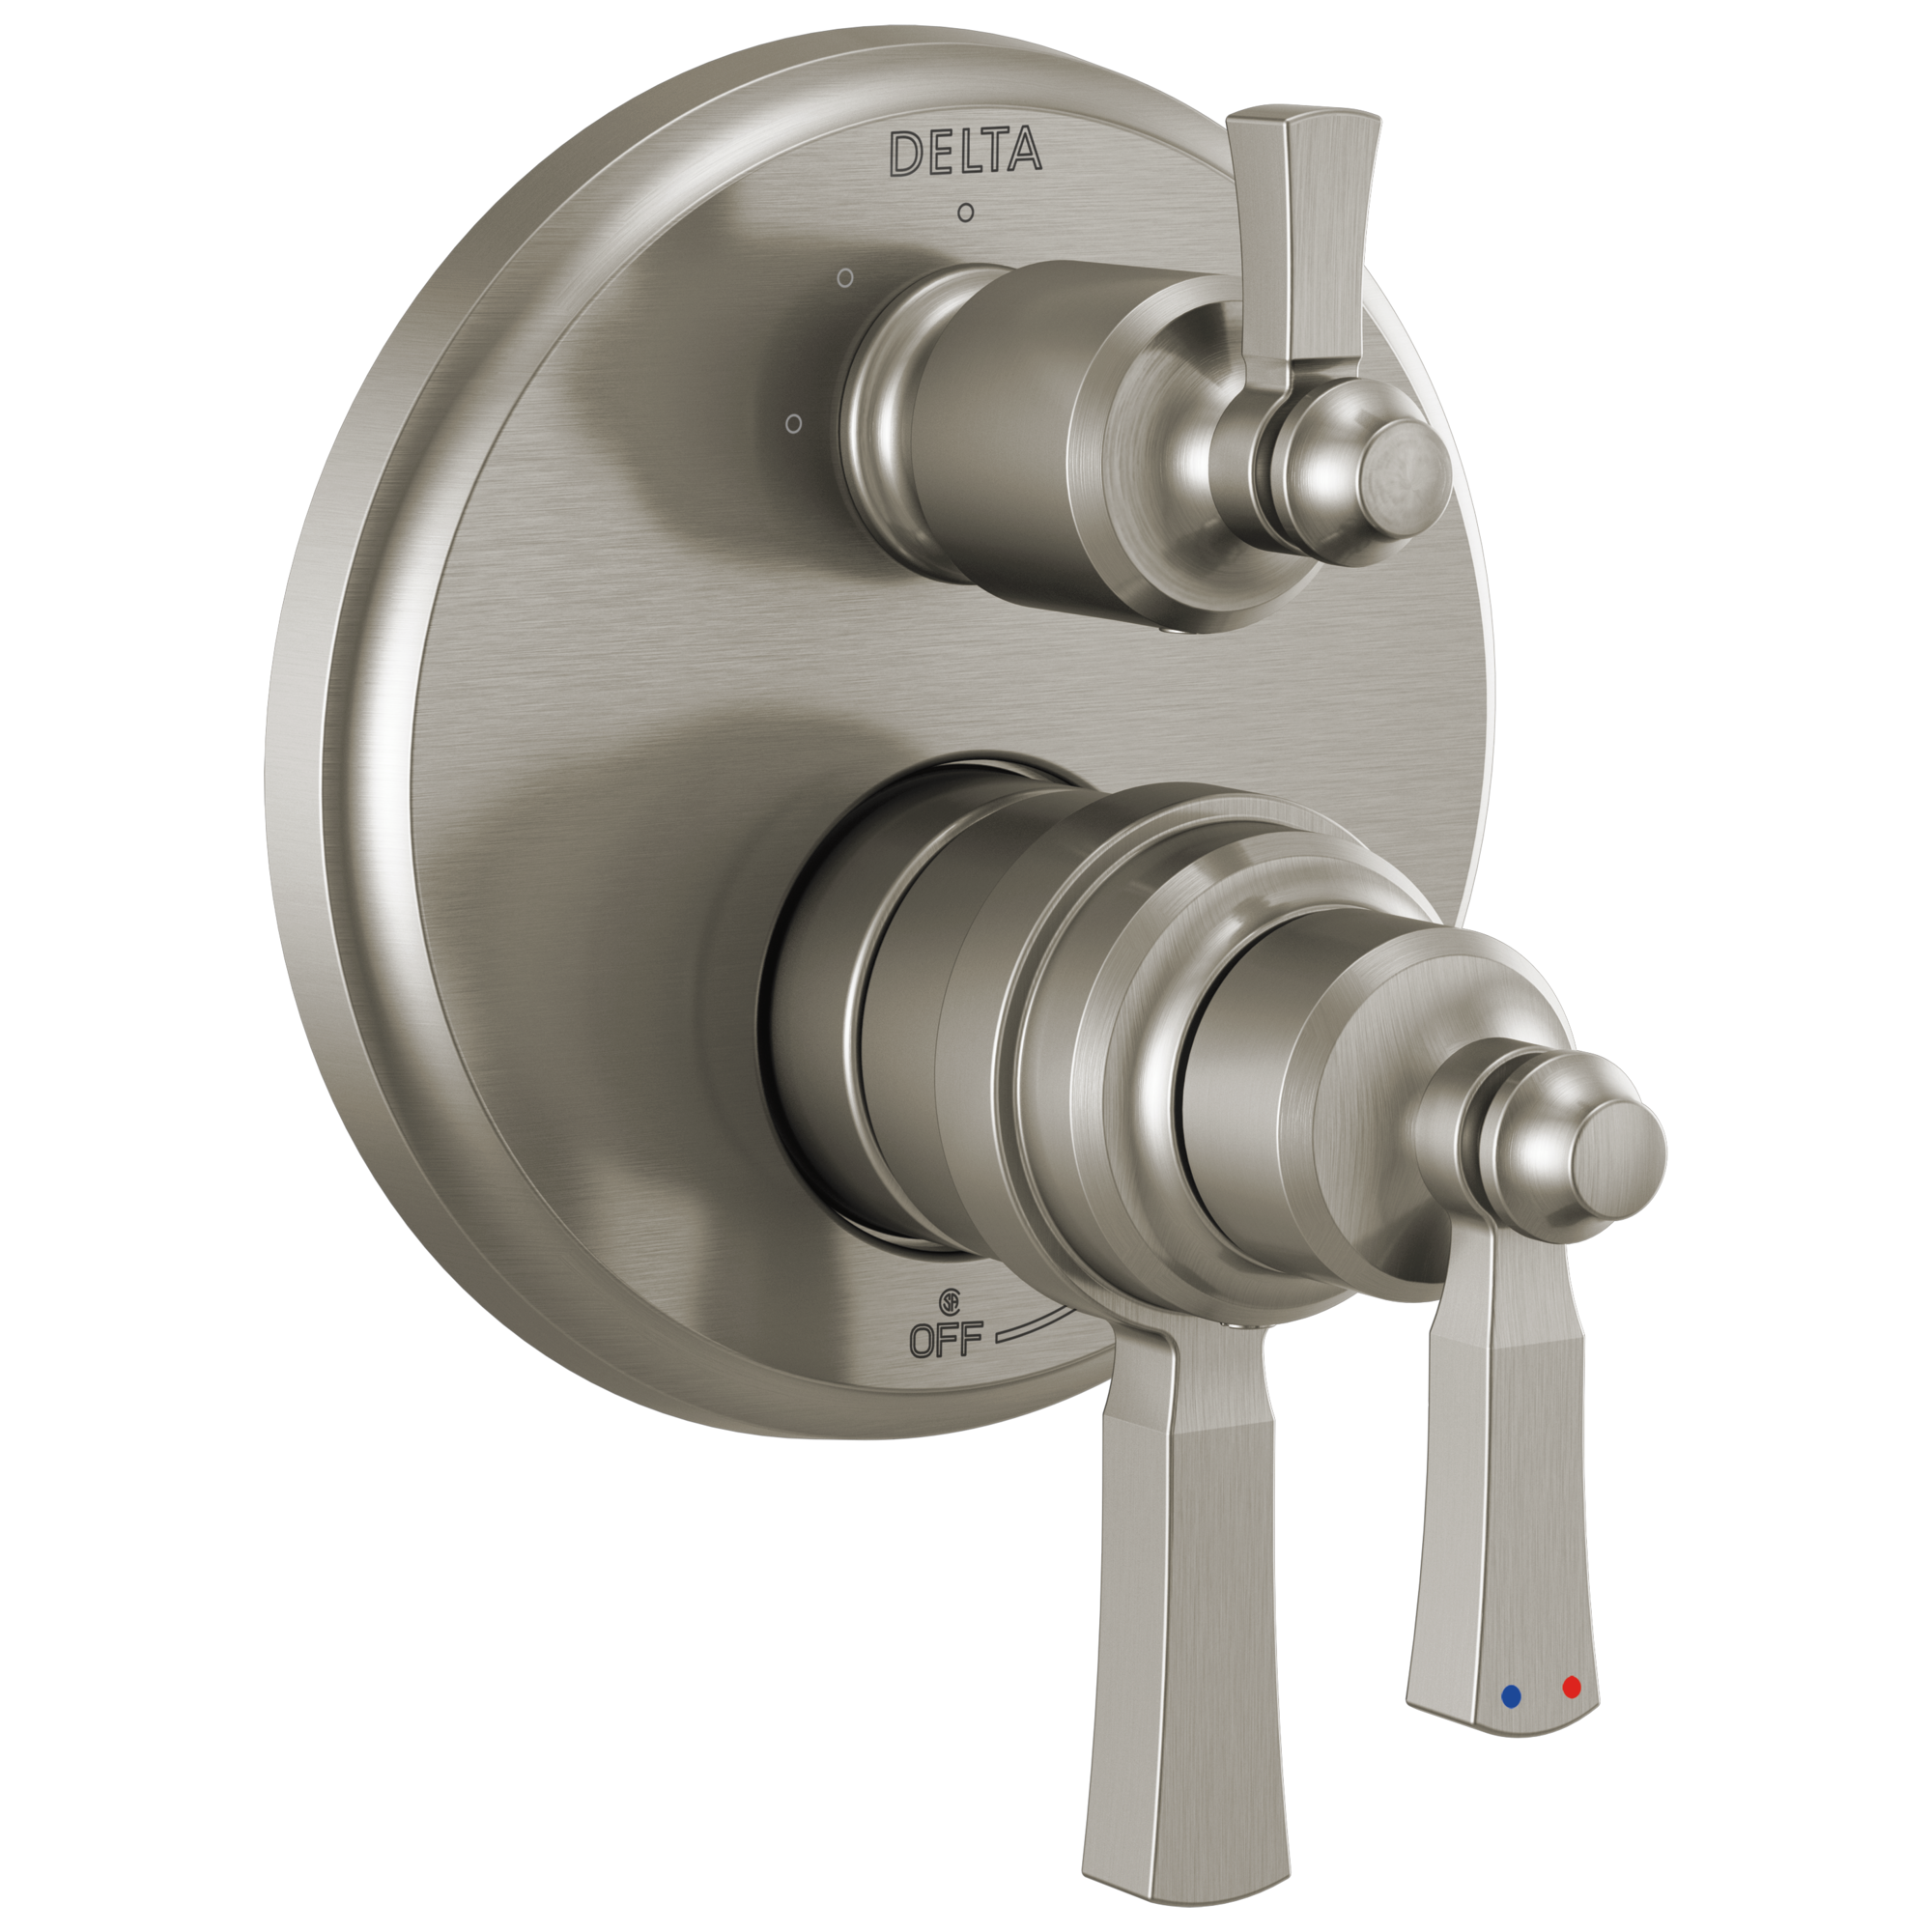 Delta Dorval: Traditional 2-Handle Monitor 17T Series Valve Trim with 6 Setting Diverter